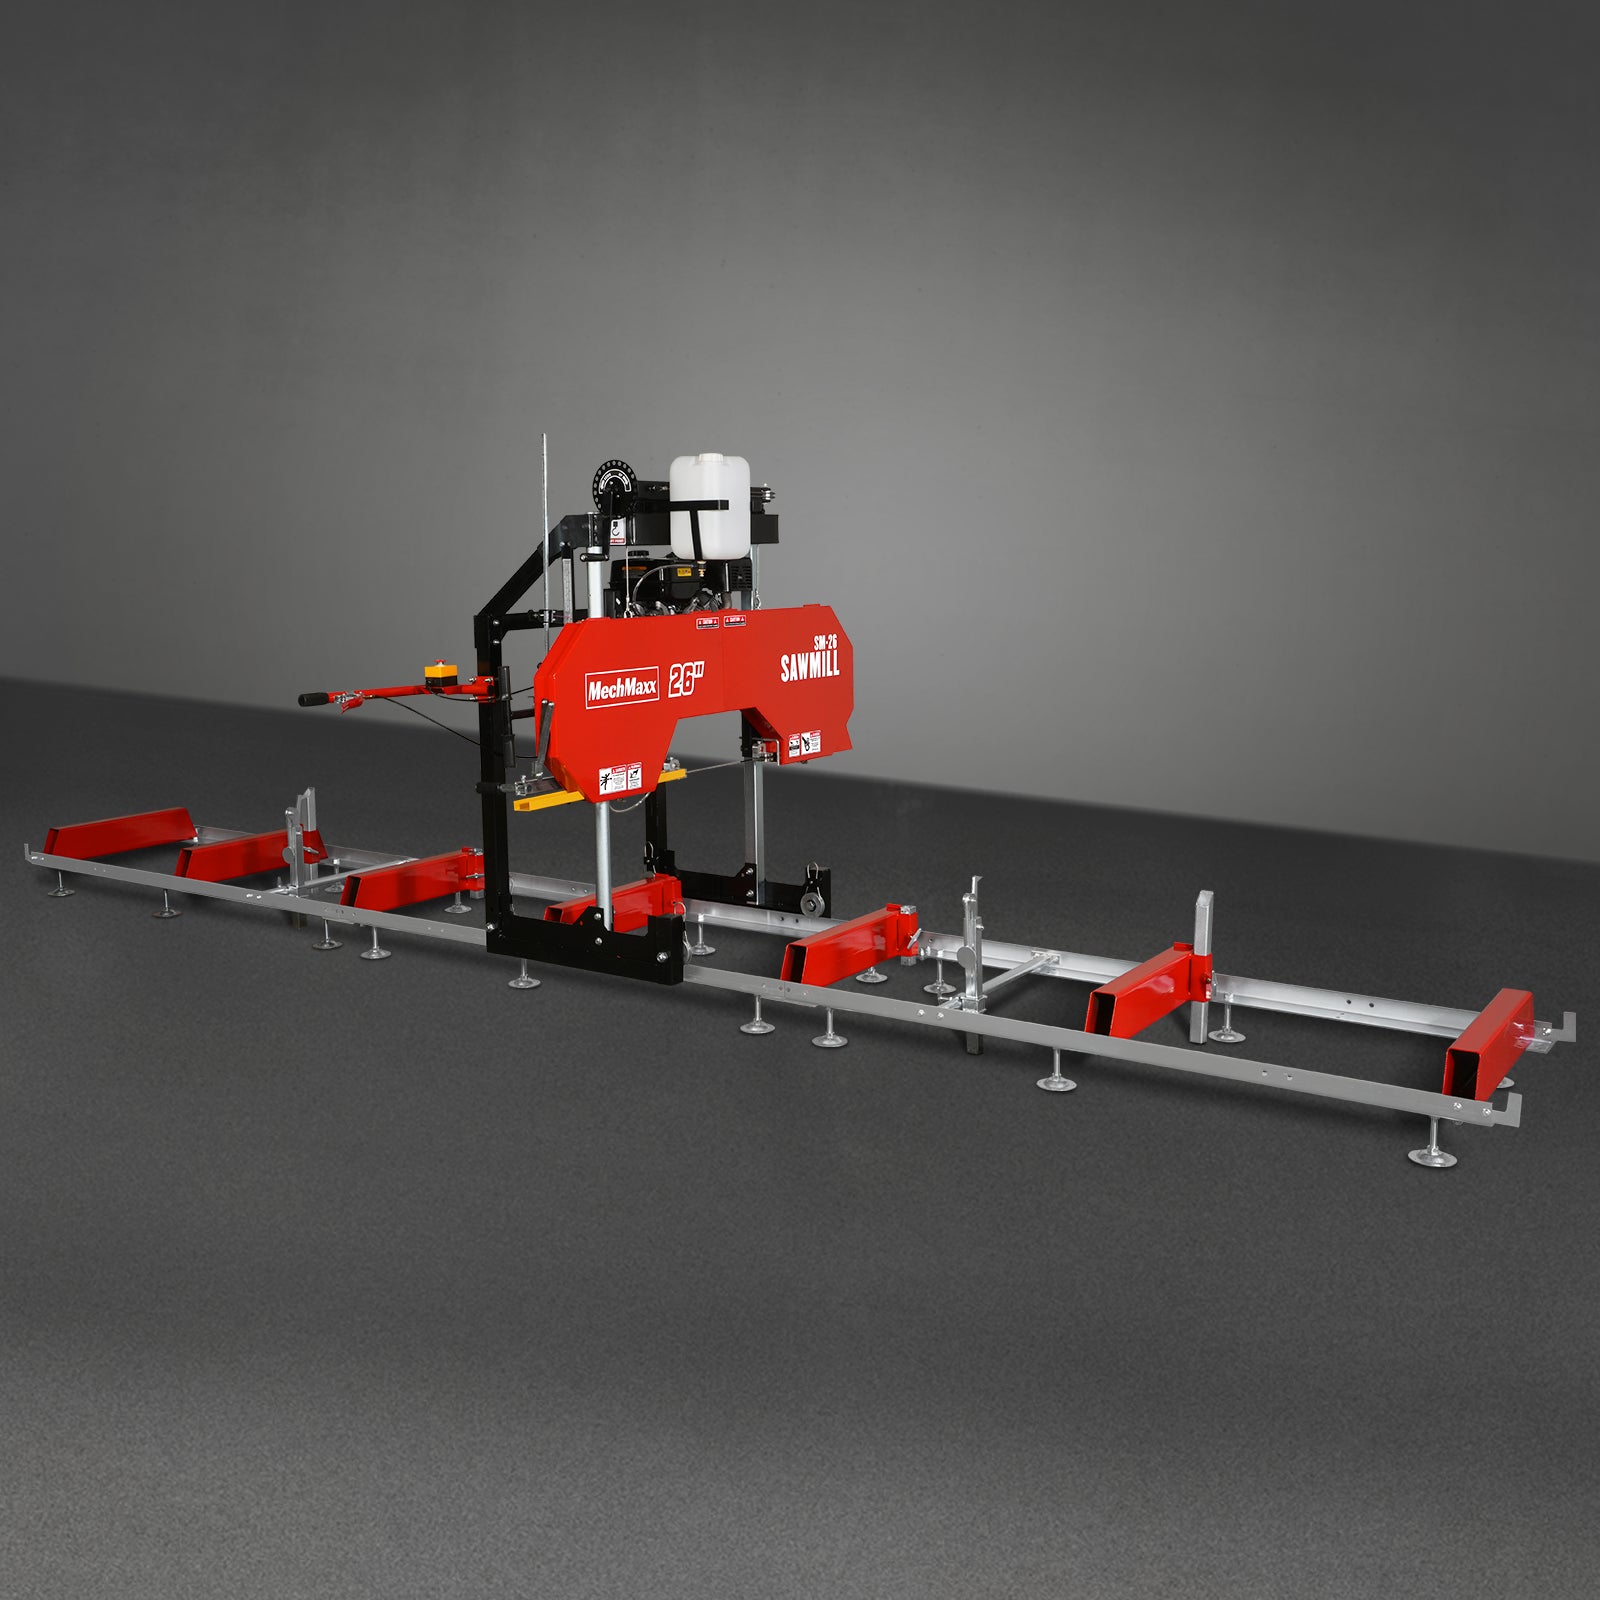 26" Portable Sawmill （5x Blades Included), 420cc 15HP E-Start Gasoline Engine, 22" Board Width, 20' Track Length (6.6' Track Extension Included)